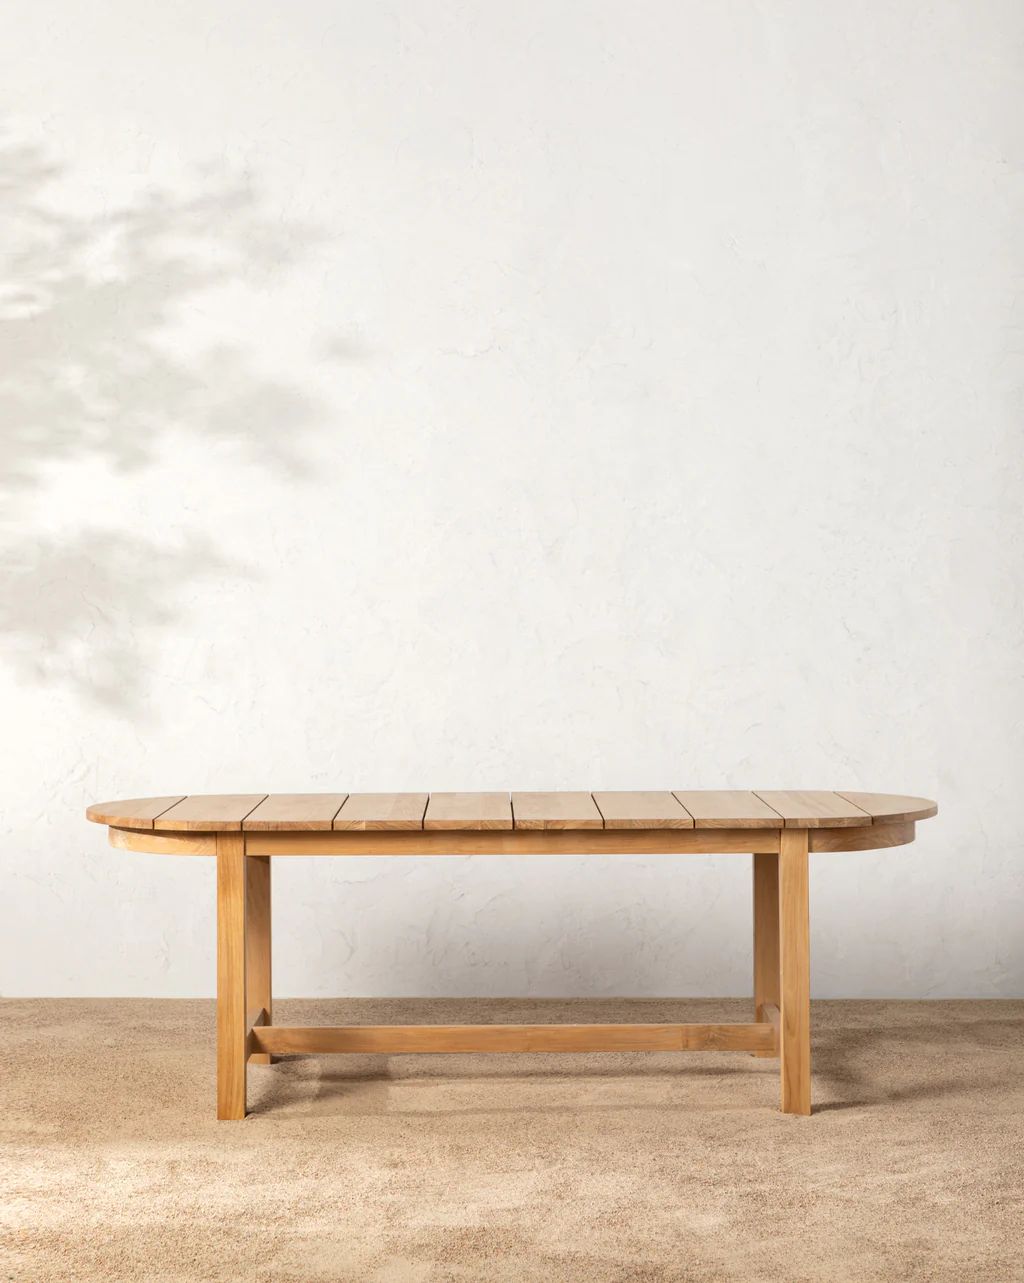 Linwood Teak Outdoor Table | McGee & Co.